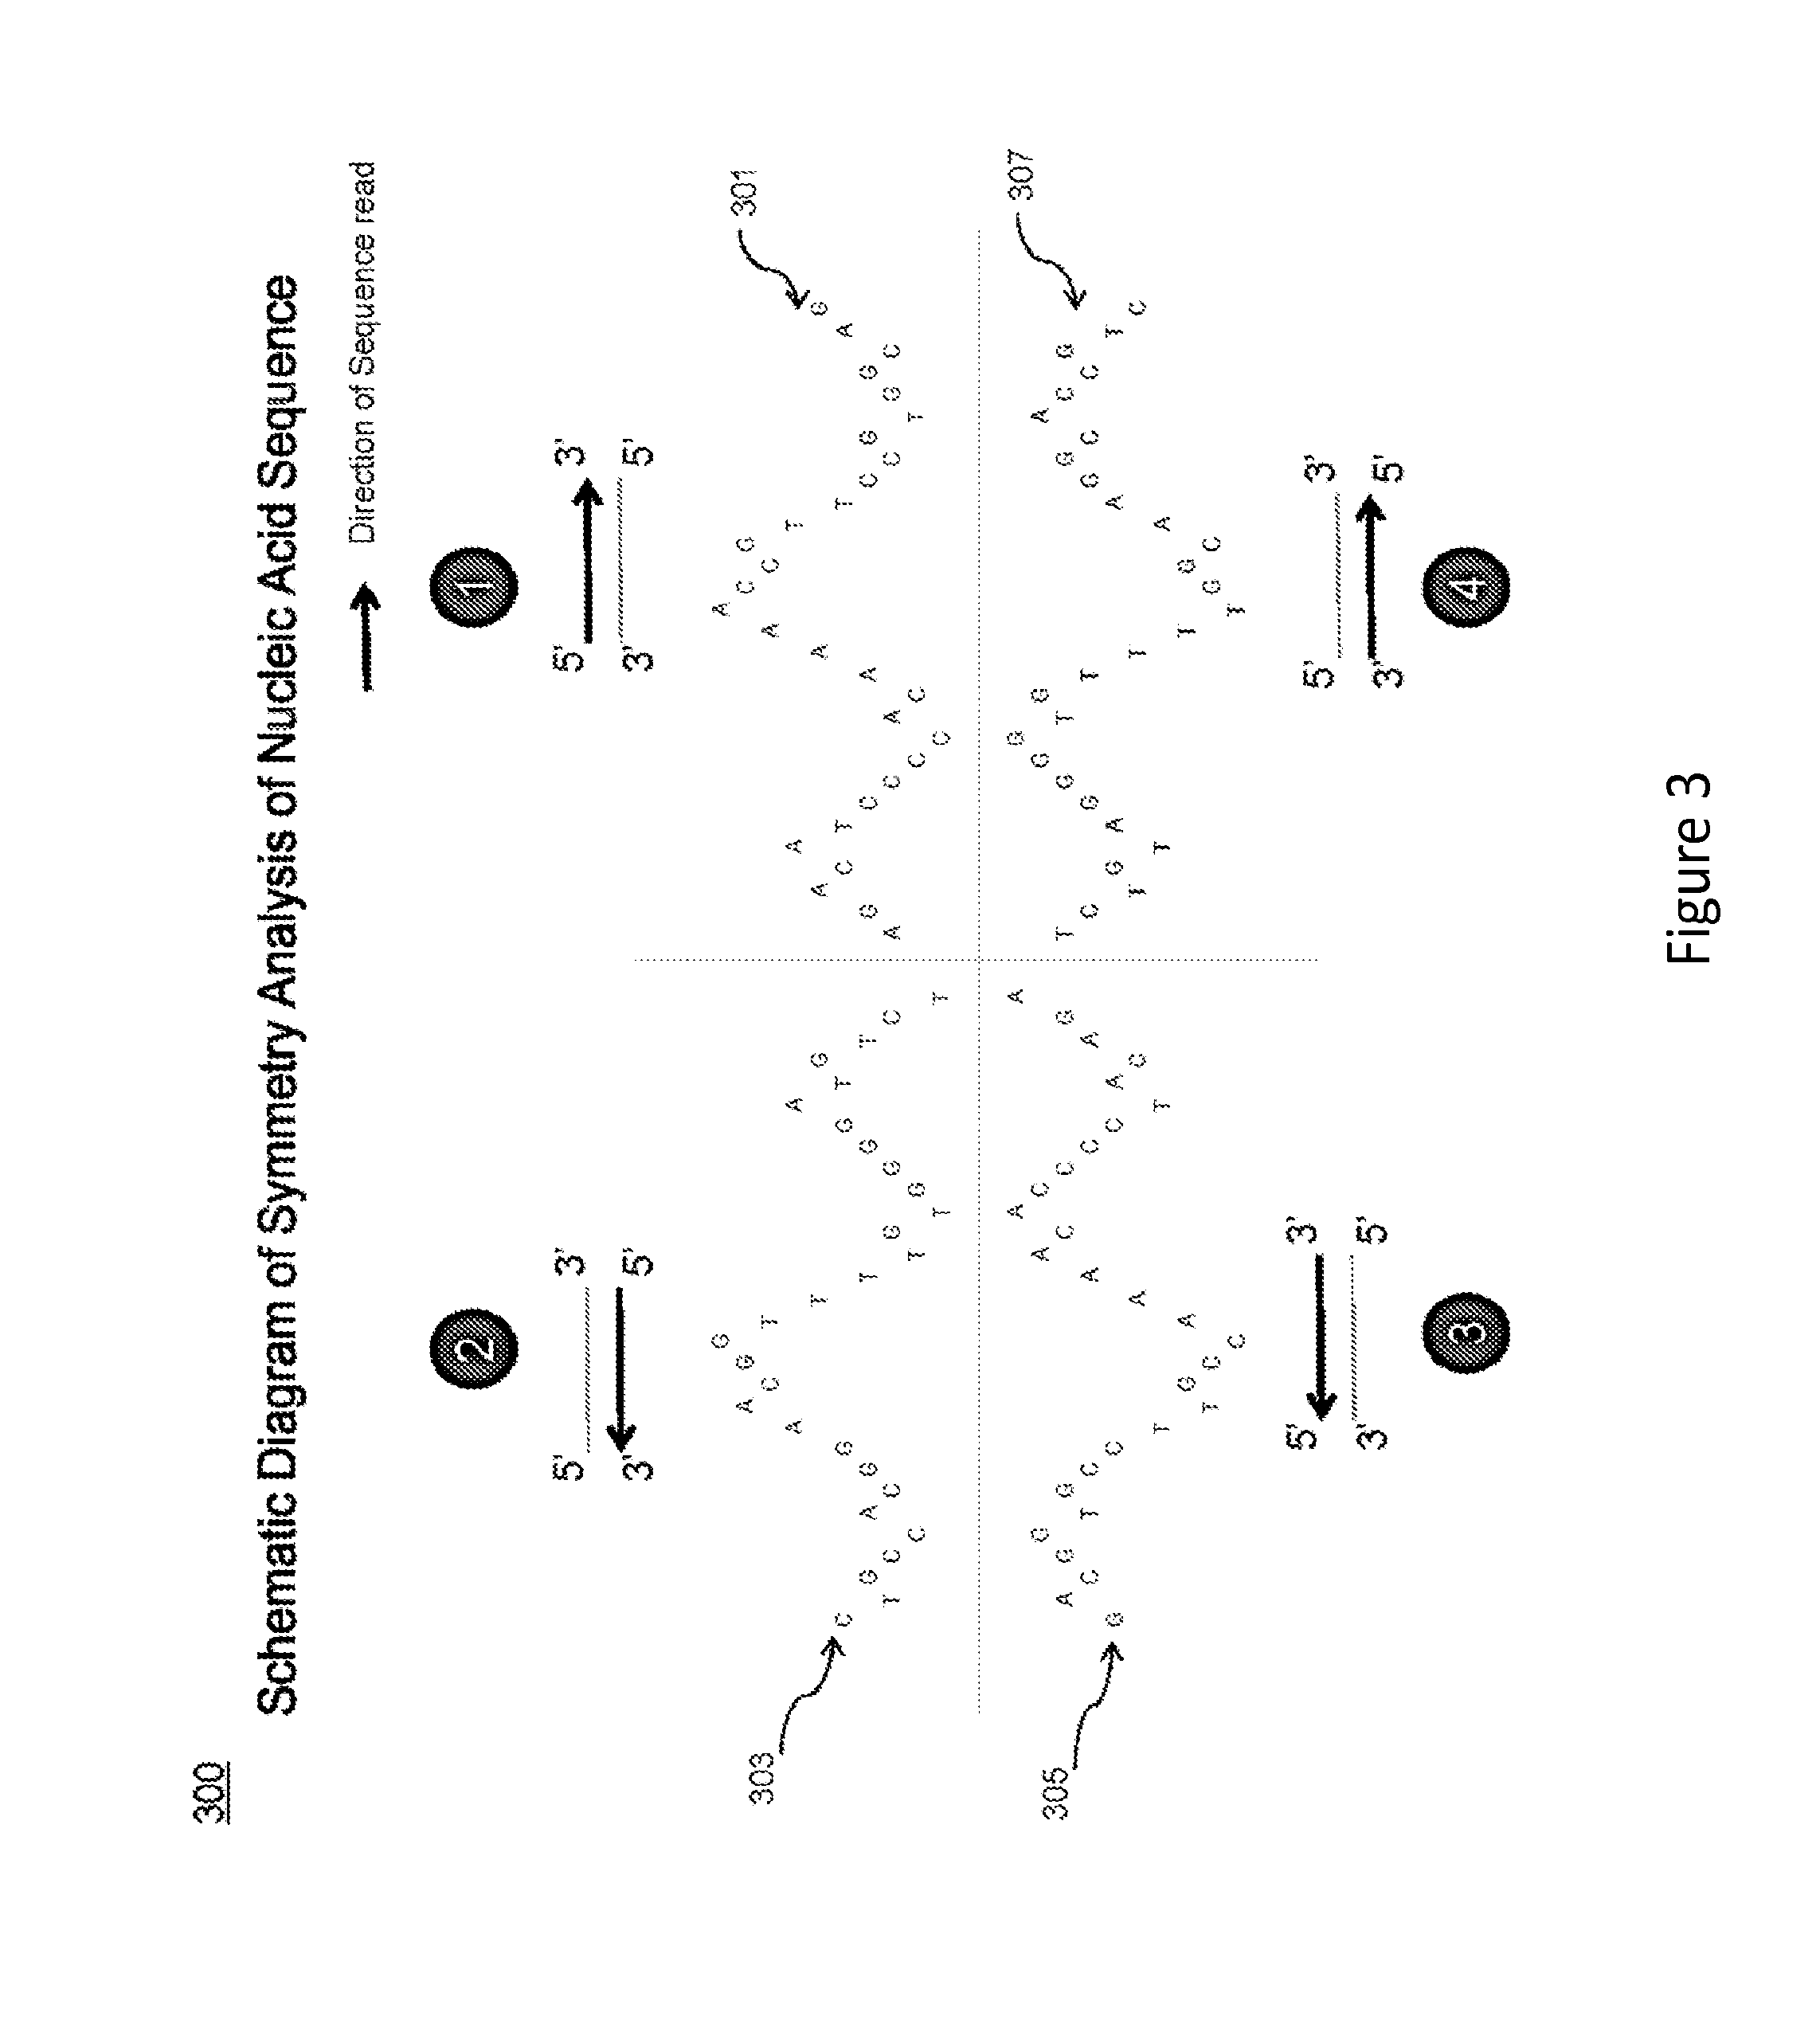 Visualization of nucleic acid sequences